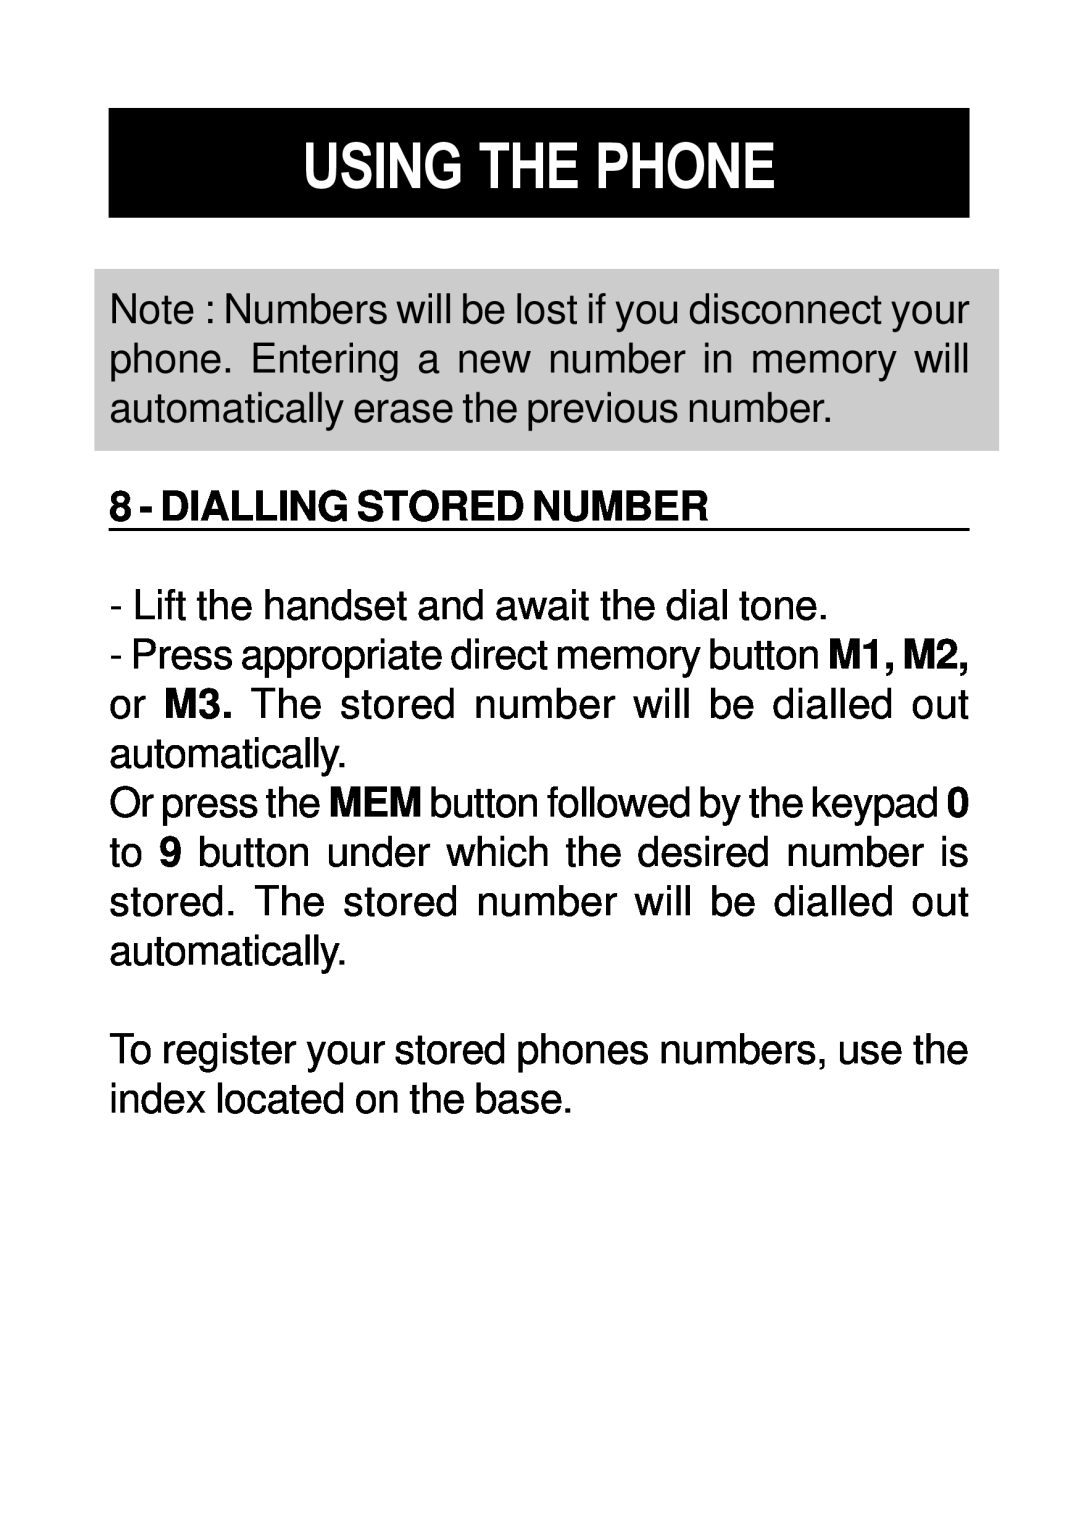 Geemarc Dallas 10 manual Dialling Stored Number, Using The Phone 